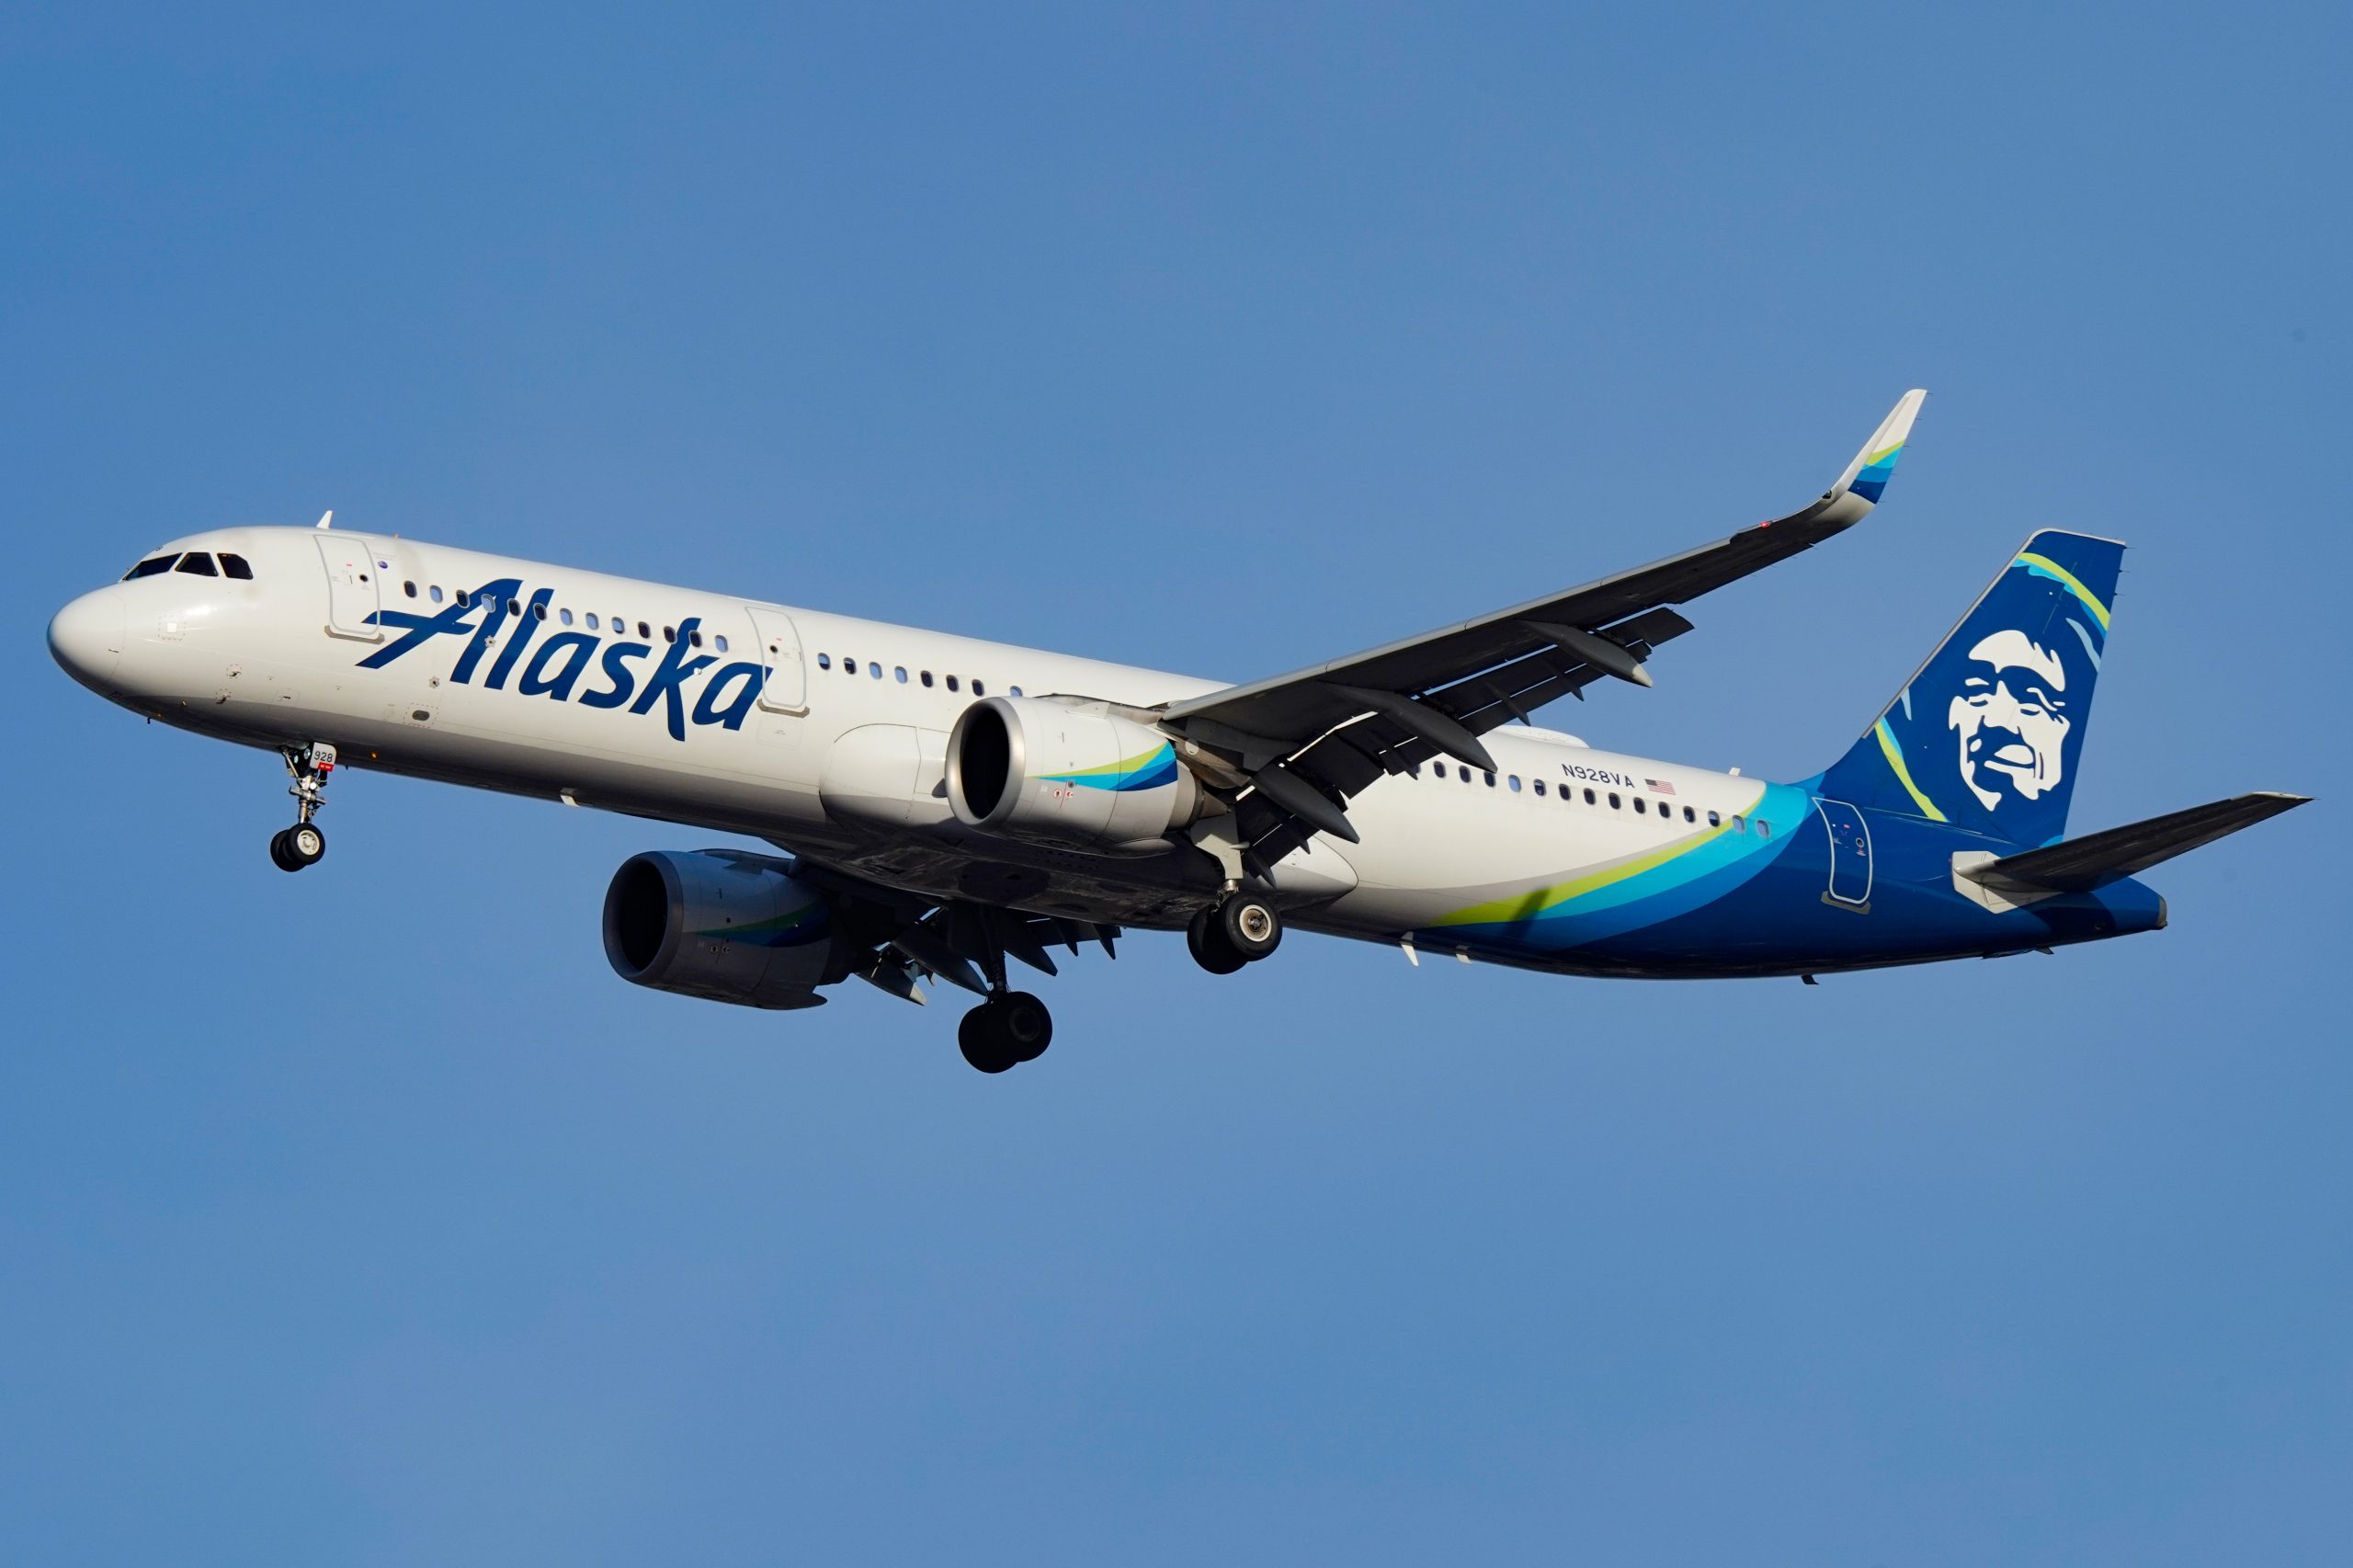 An Alaska Airlines Airbus on final approach.